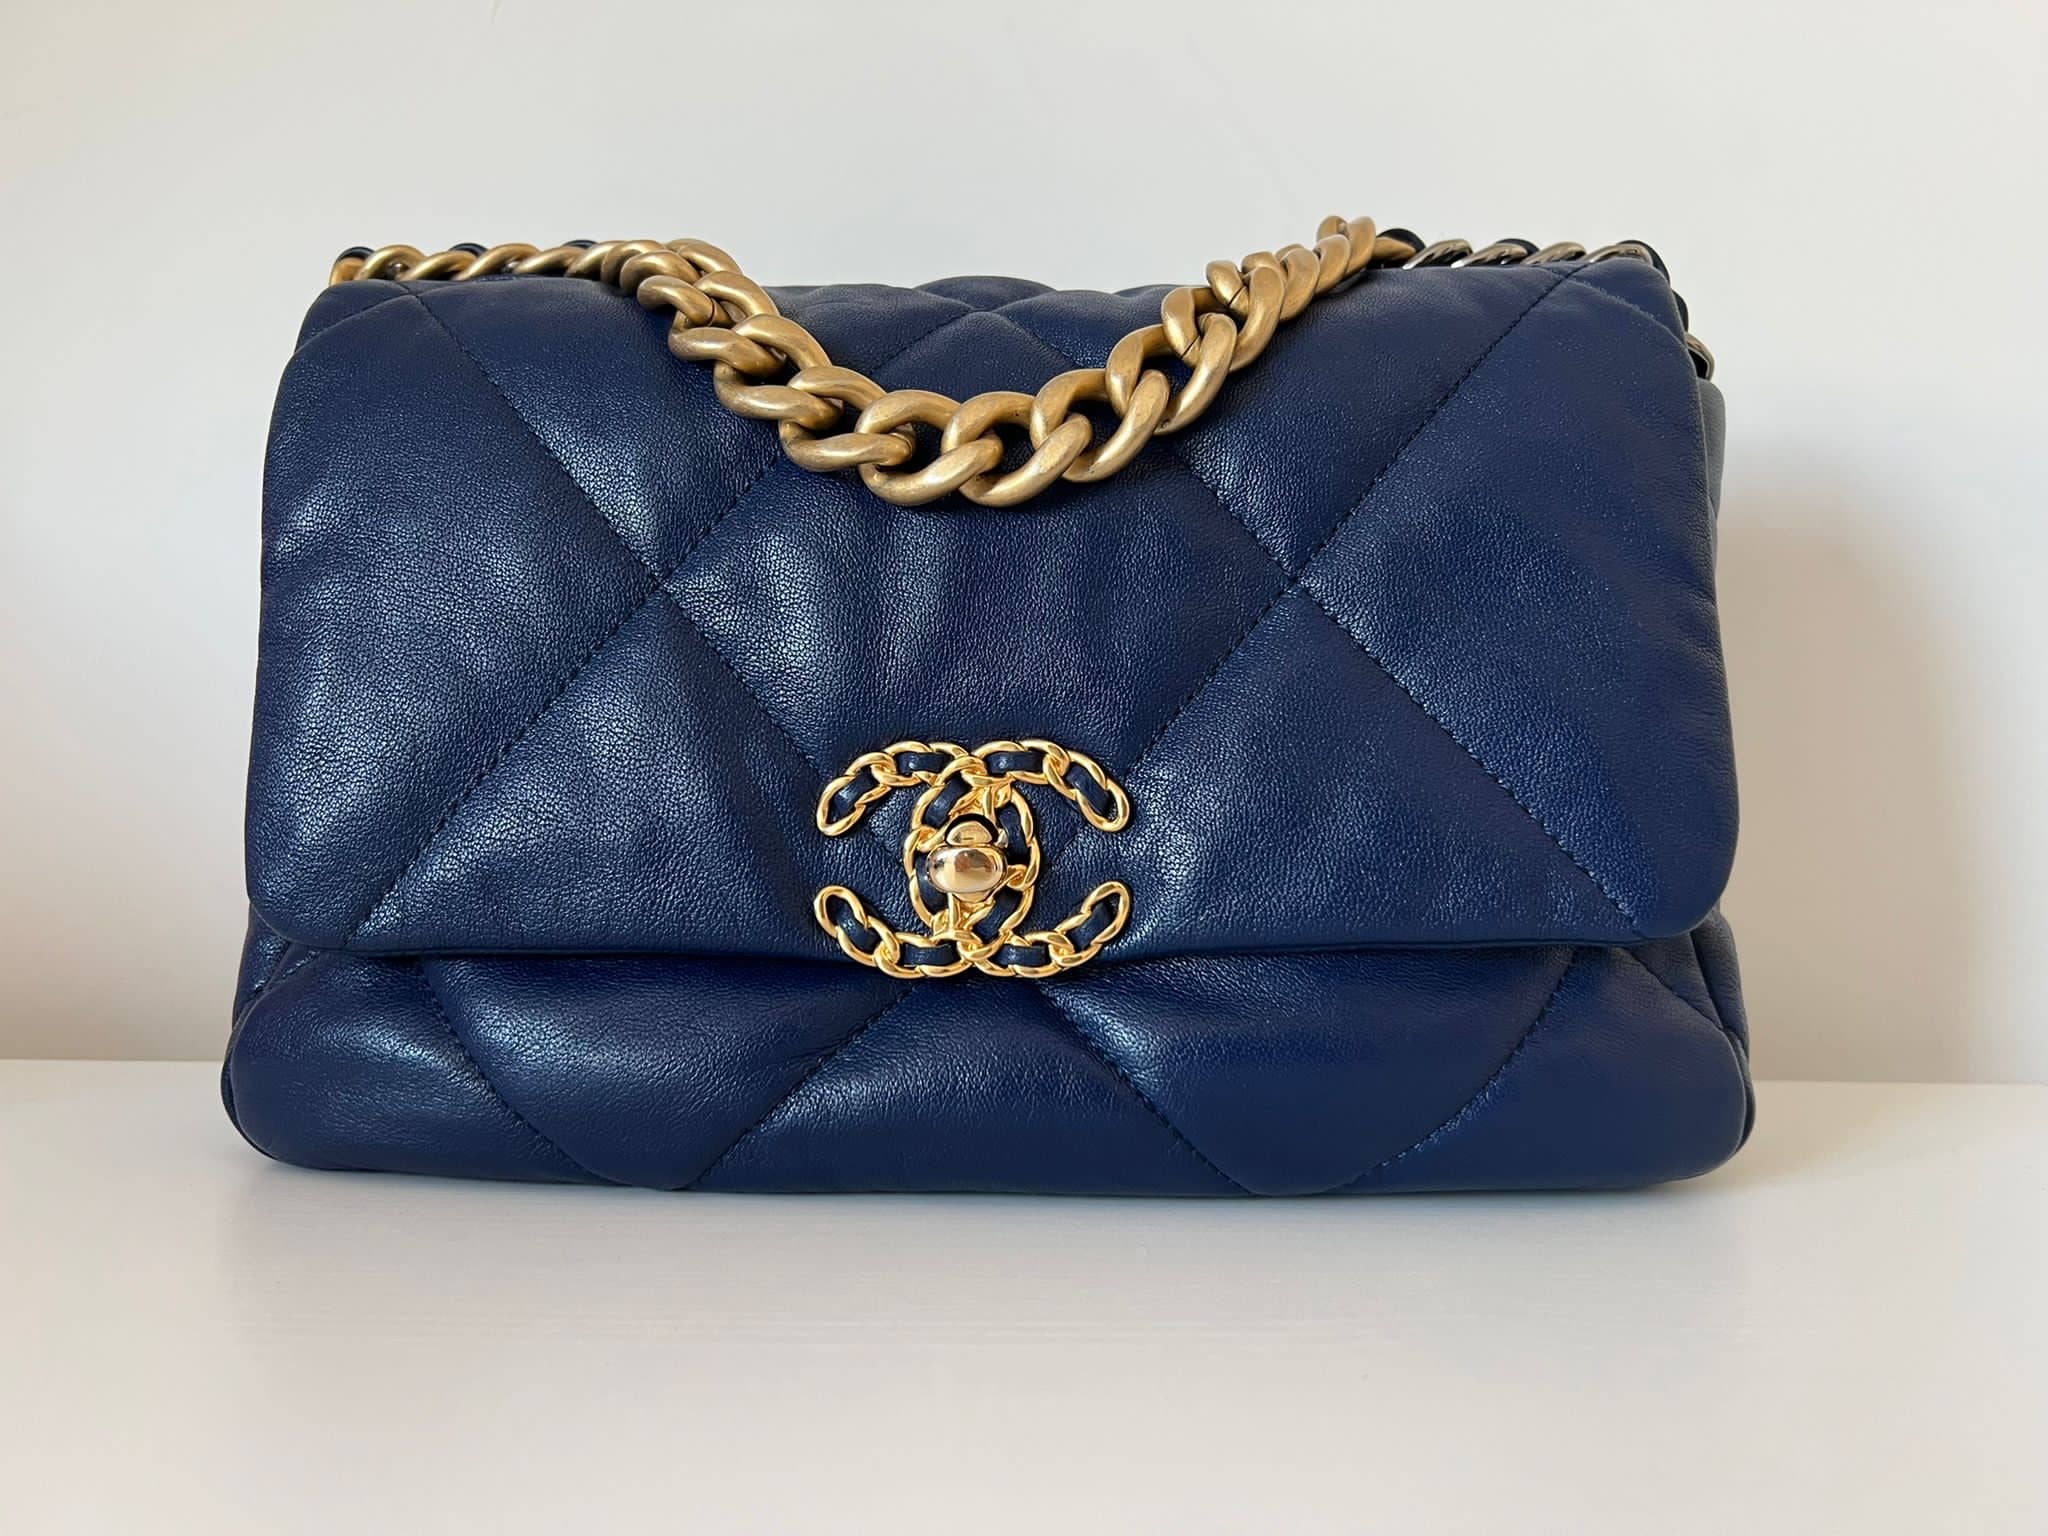 Chanel 19 Size Small in series 29 Navy Blue Leather with Mixed GHW